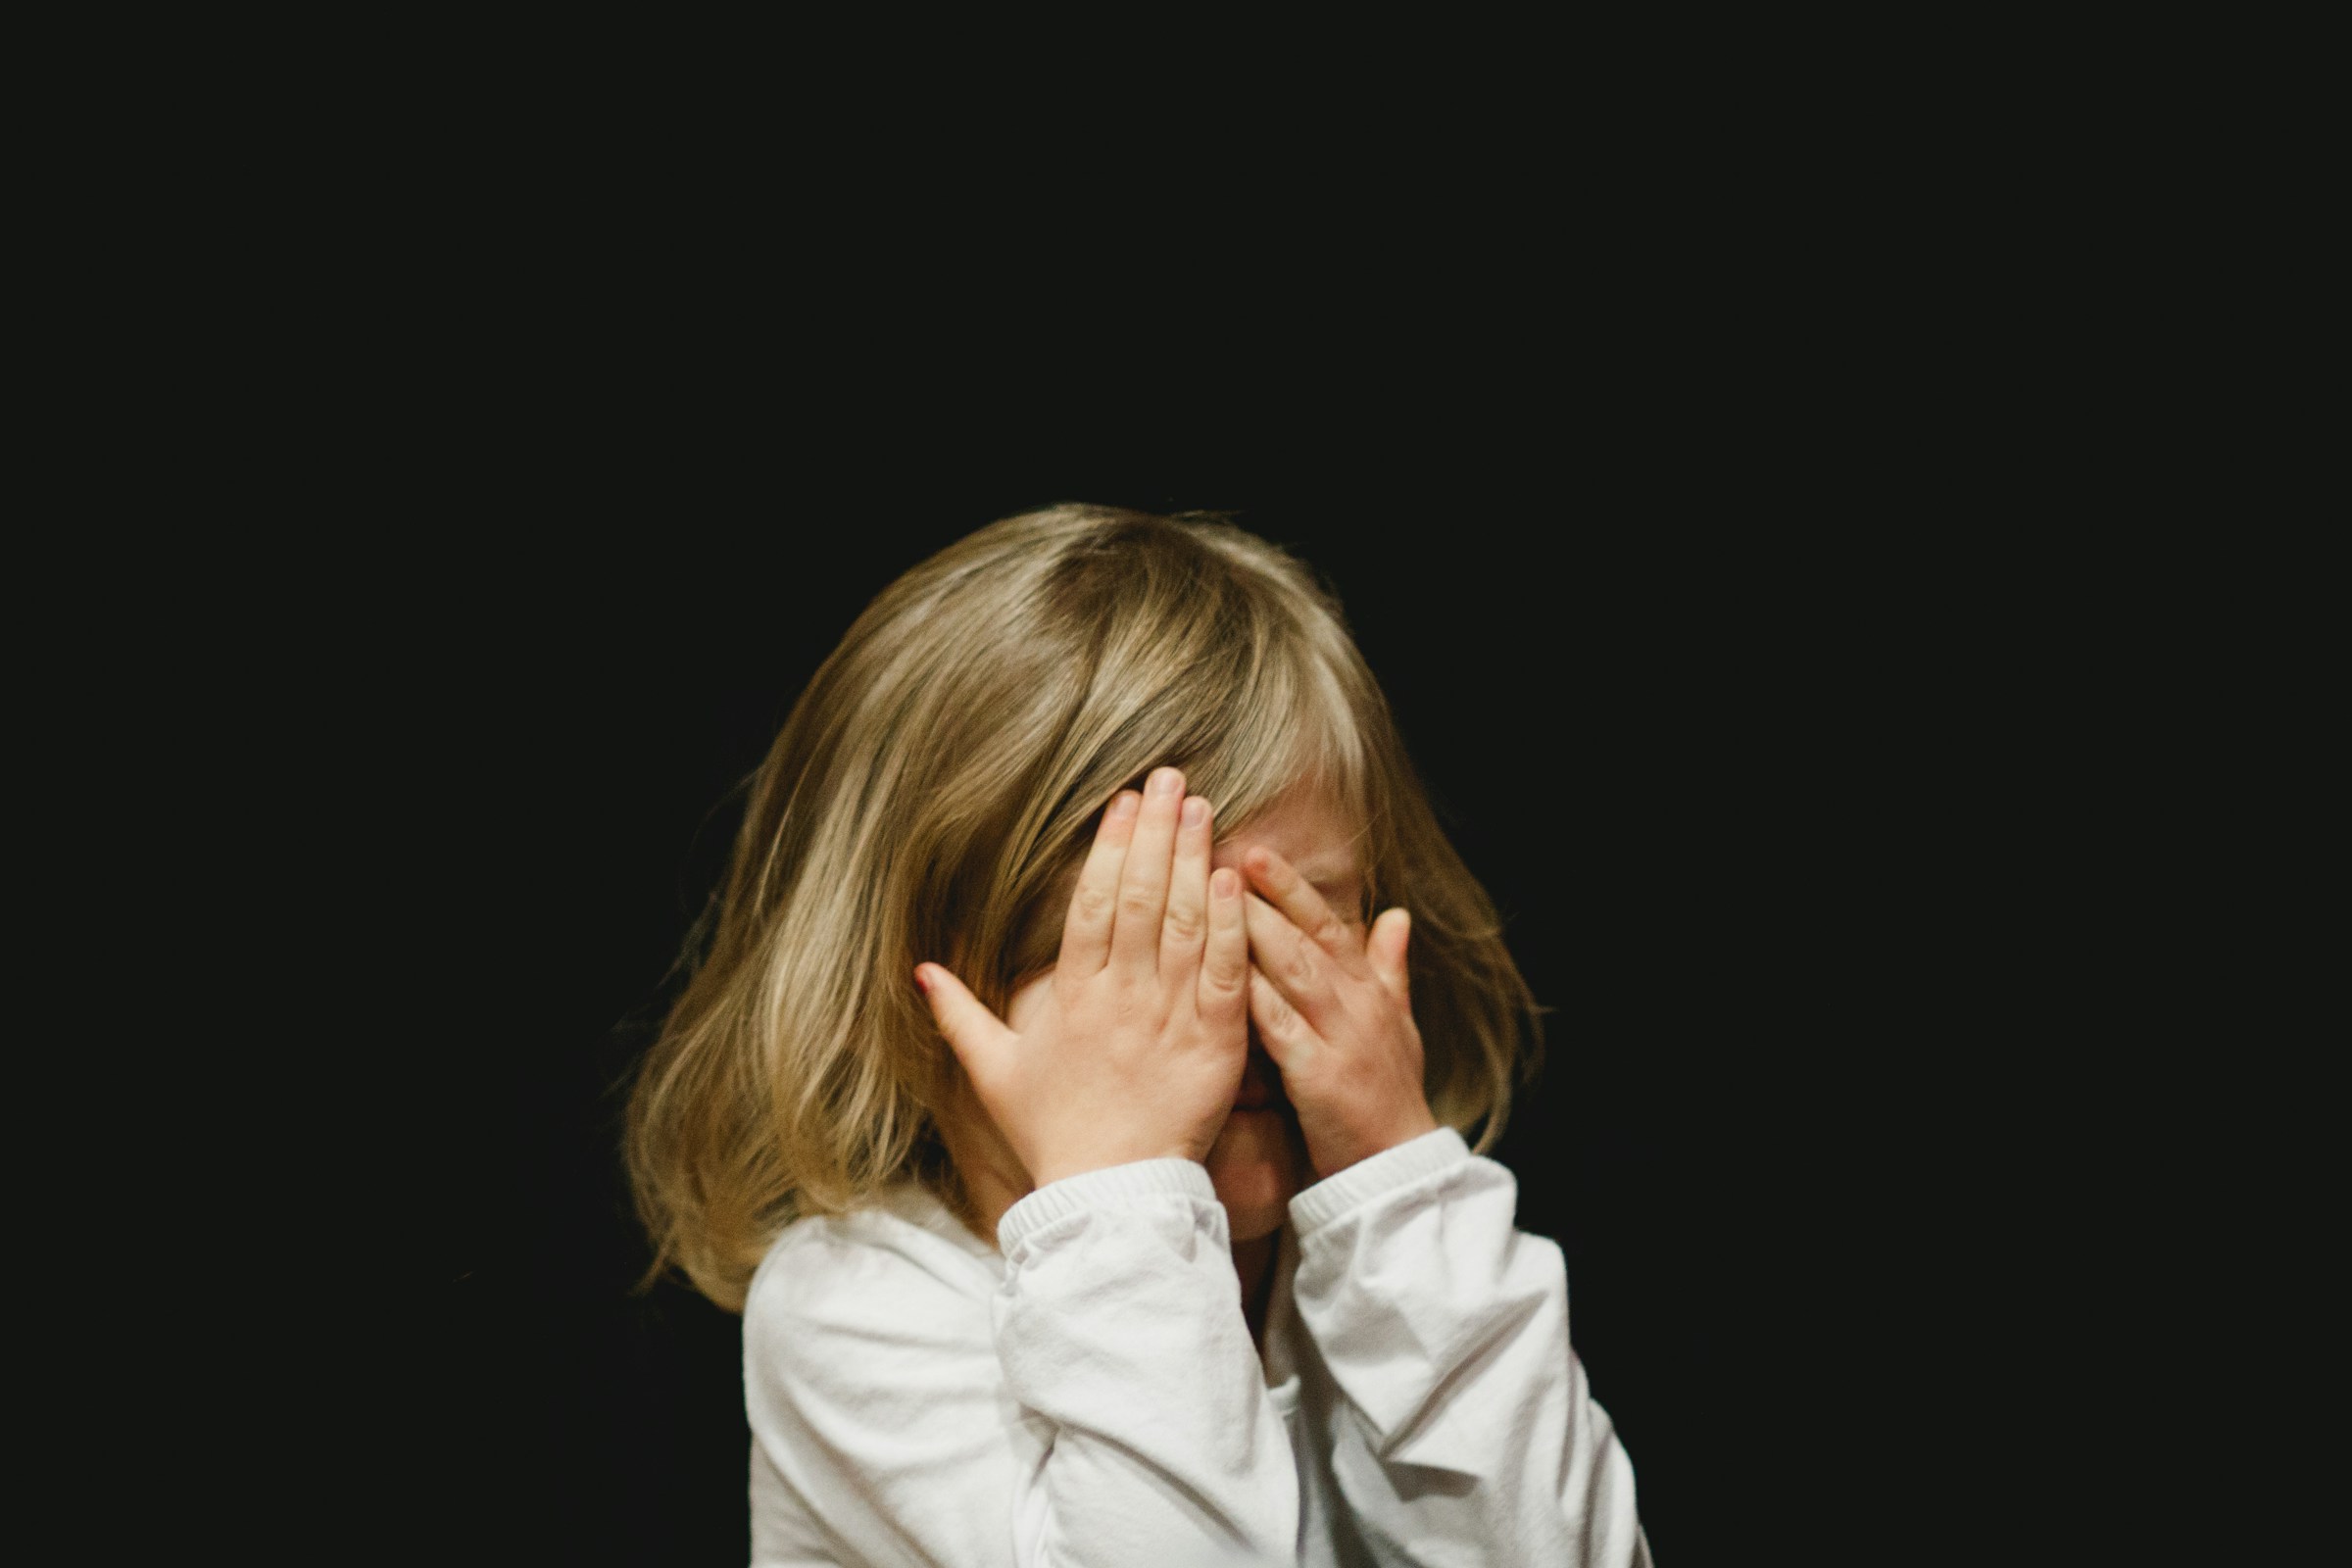 A little girl covering her face | Source: Unsplash